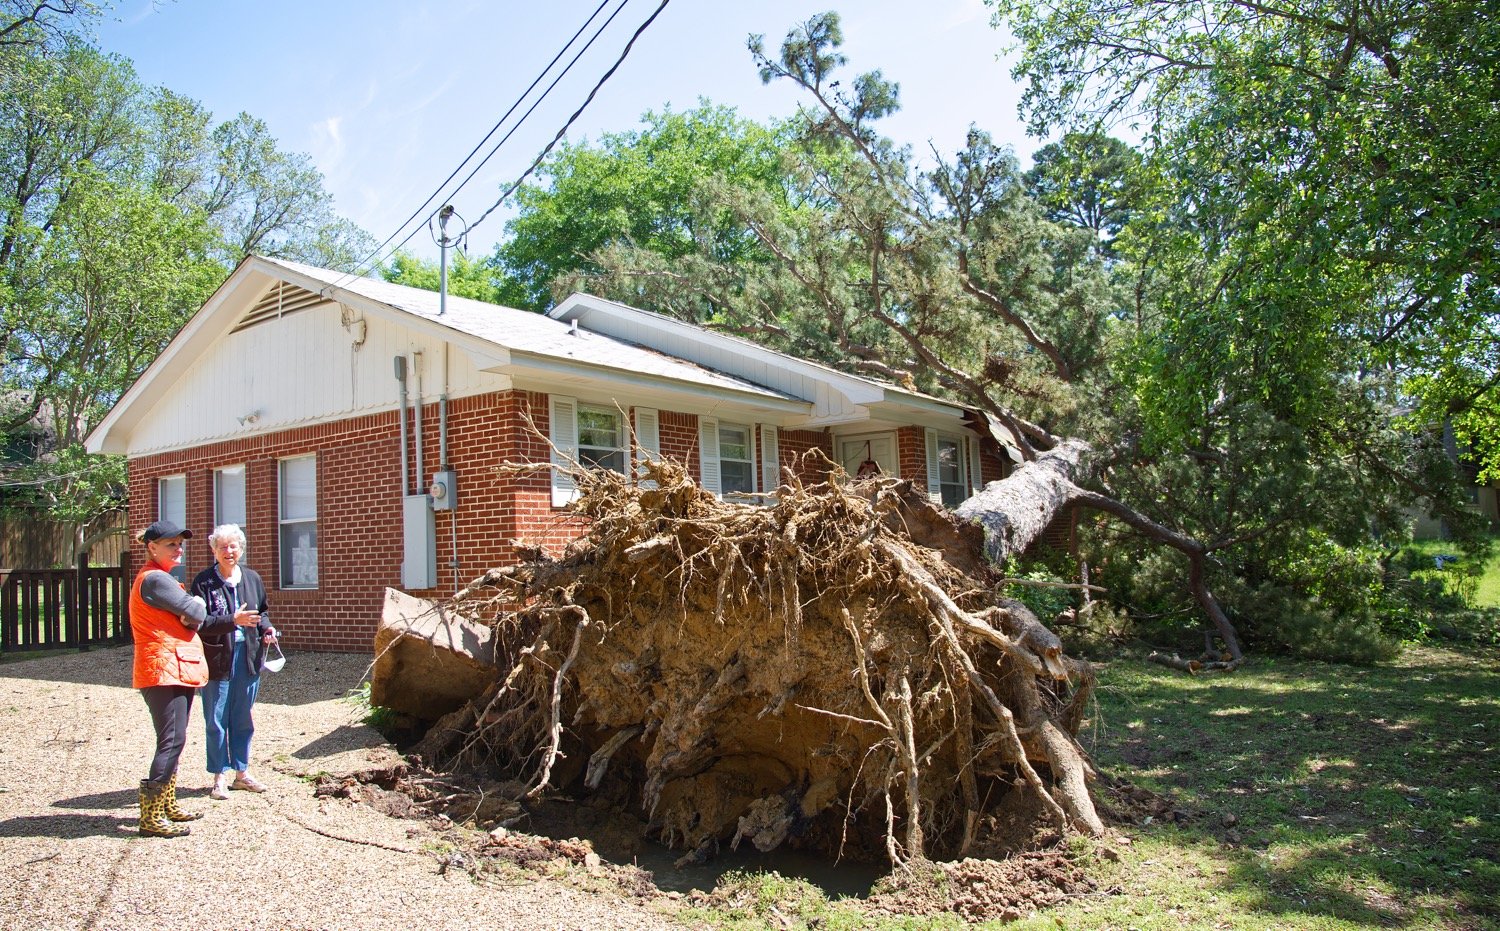 Christine Creswell, right, stands with Allene Doggett next to the uprooted pine that fell onto the front of Creswell’s house during a storm on Sunday in Mineola.